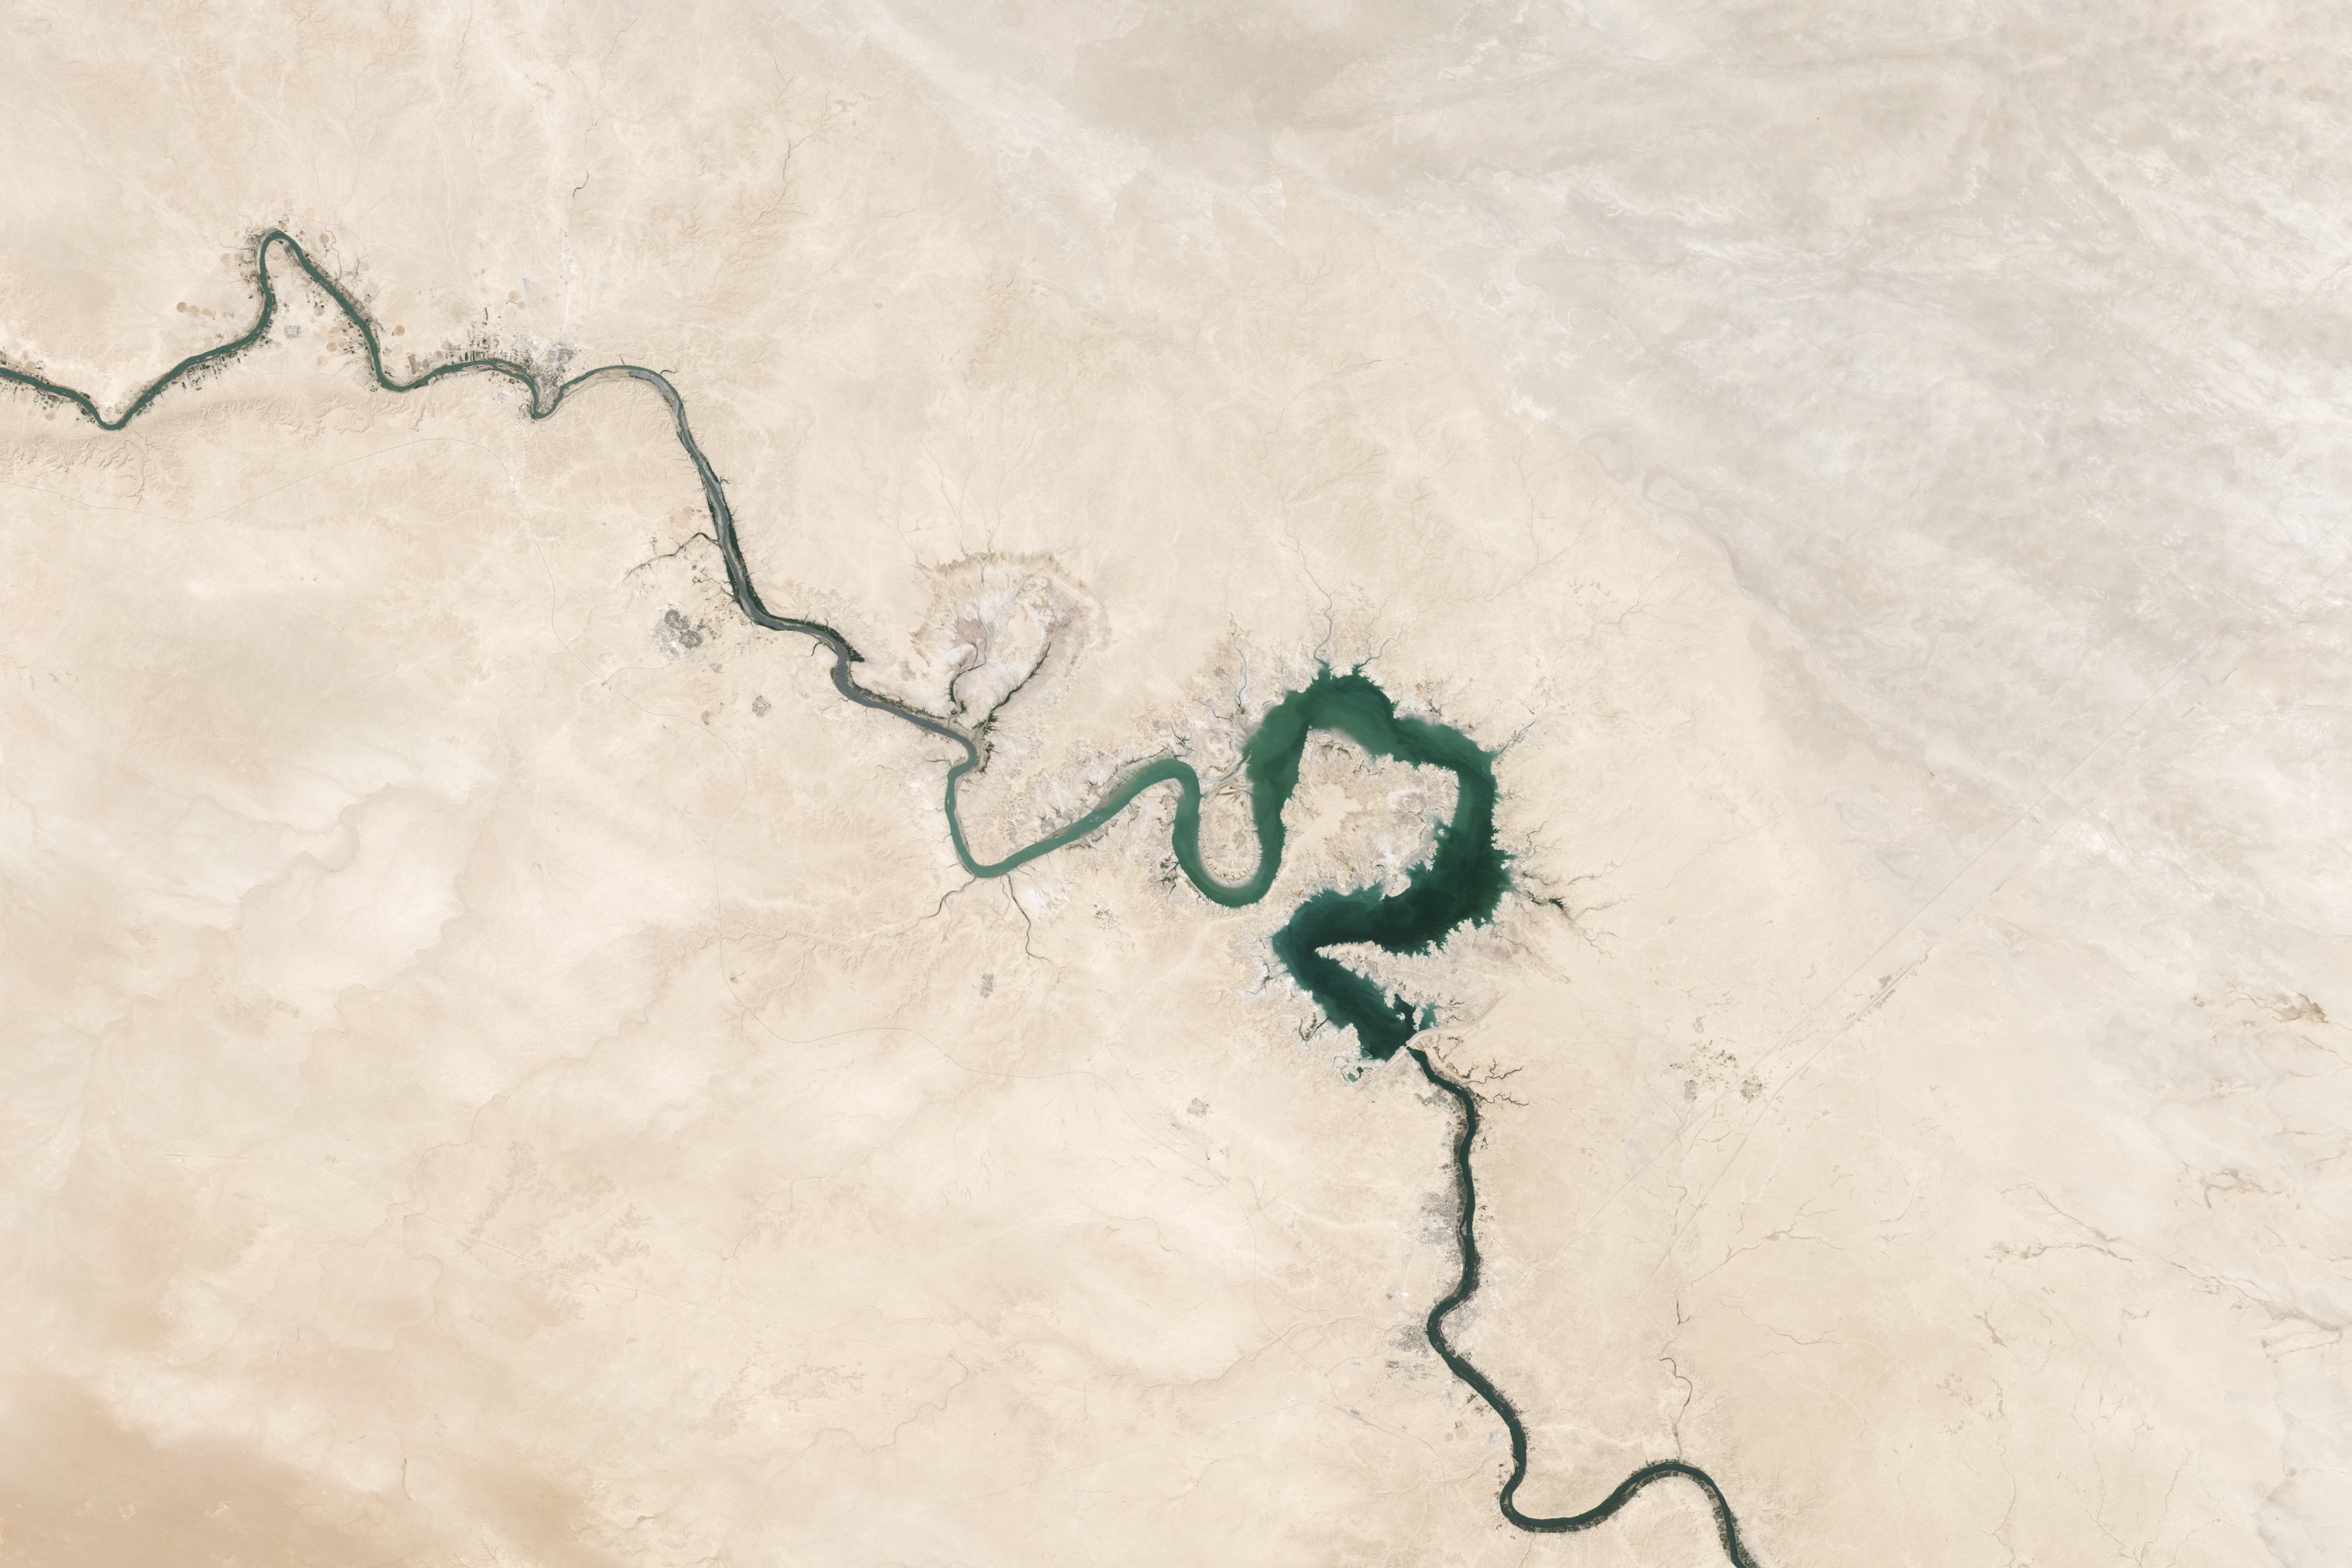 Freshwater Stores Shrank in Tigris-Euphrates Basin - related image preview